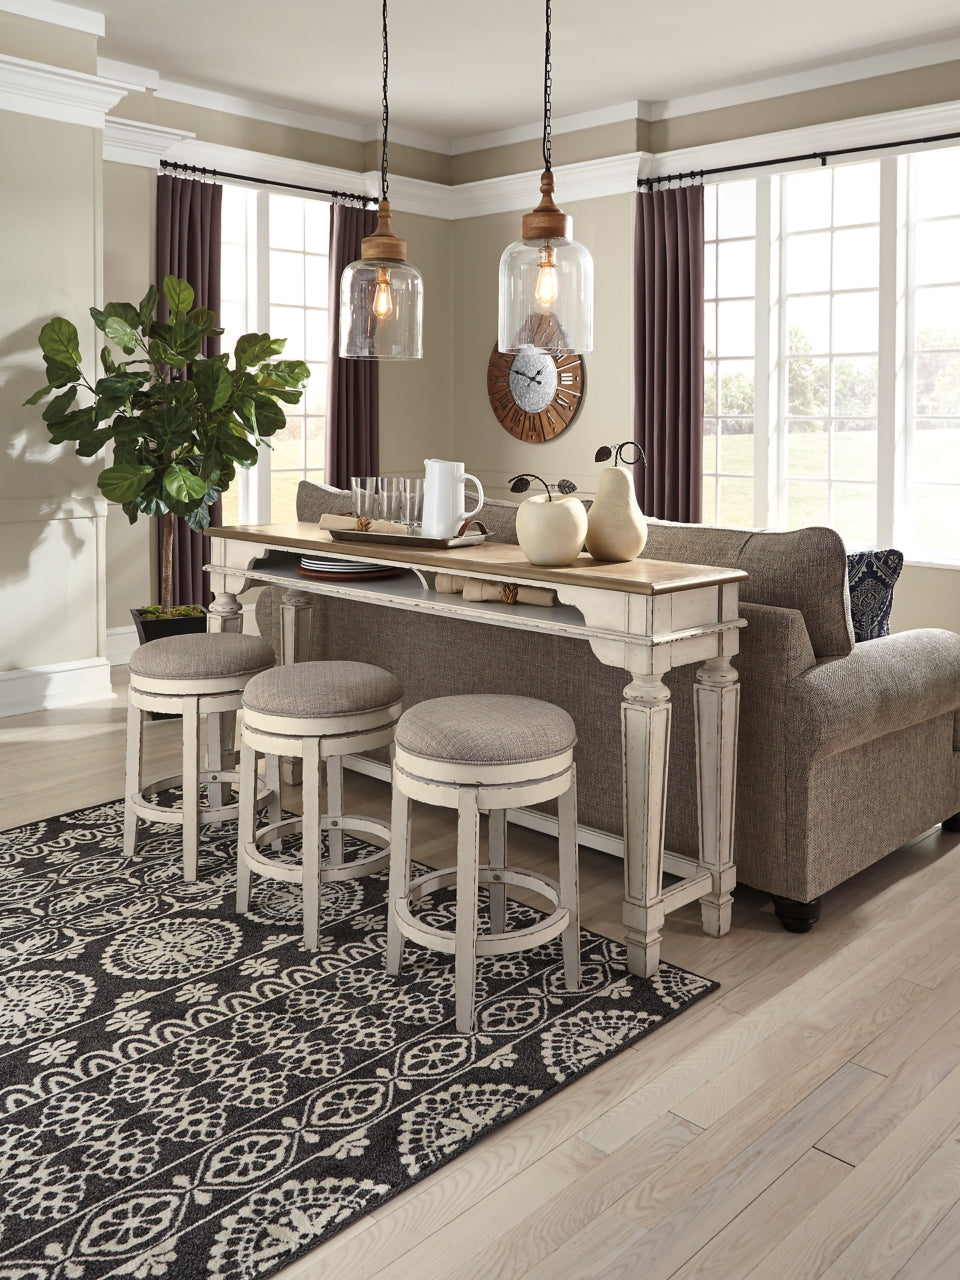 Realyn Counter Height Dining Table and 4 Barstools - PKG014030